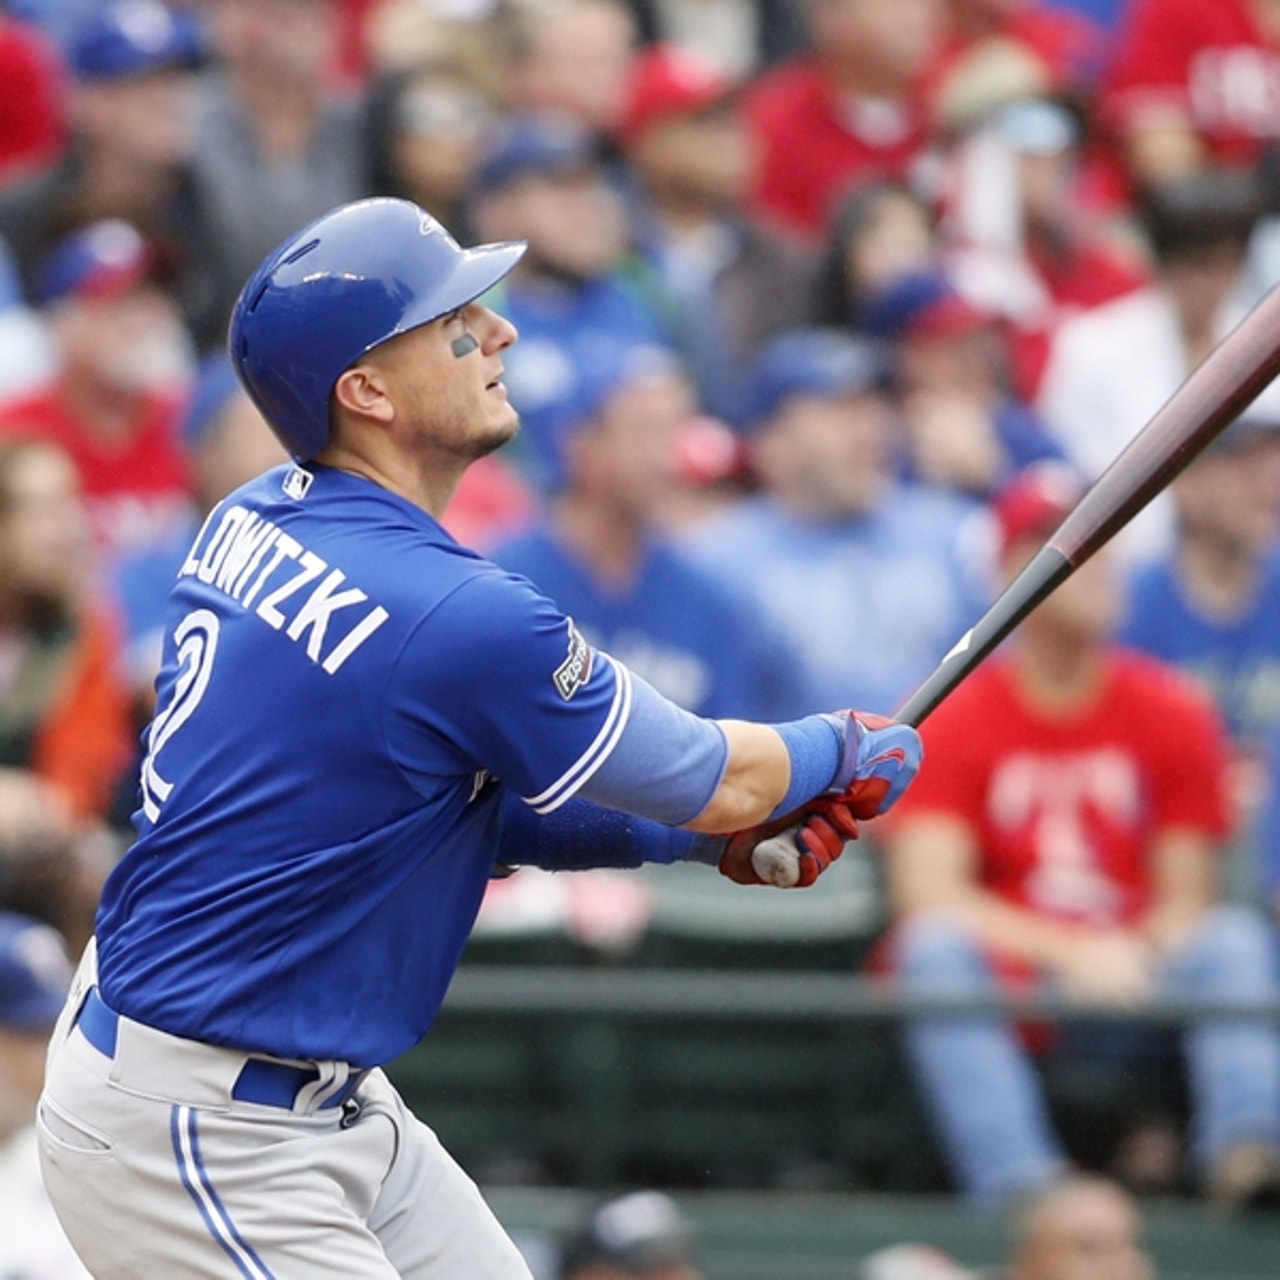 Troy Tulowitzki and the Blue Jays power their way to 2-0 series lead